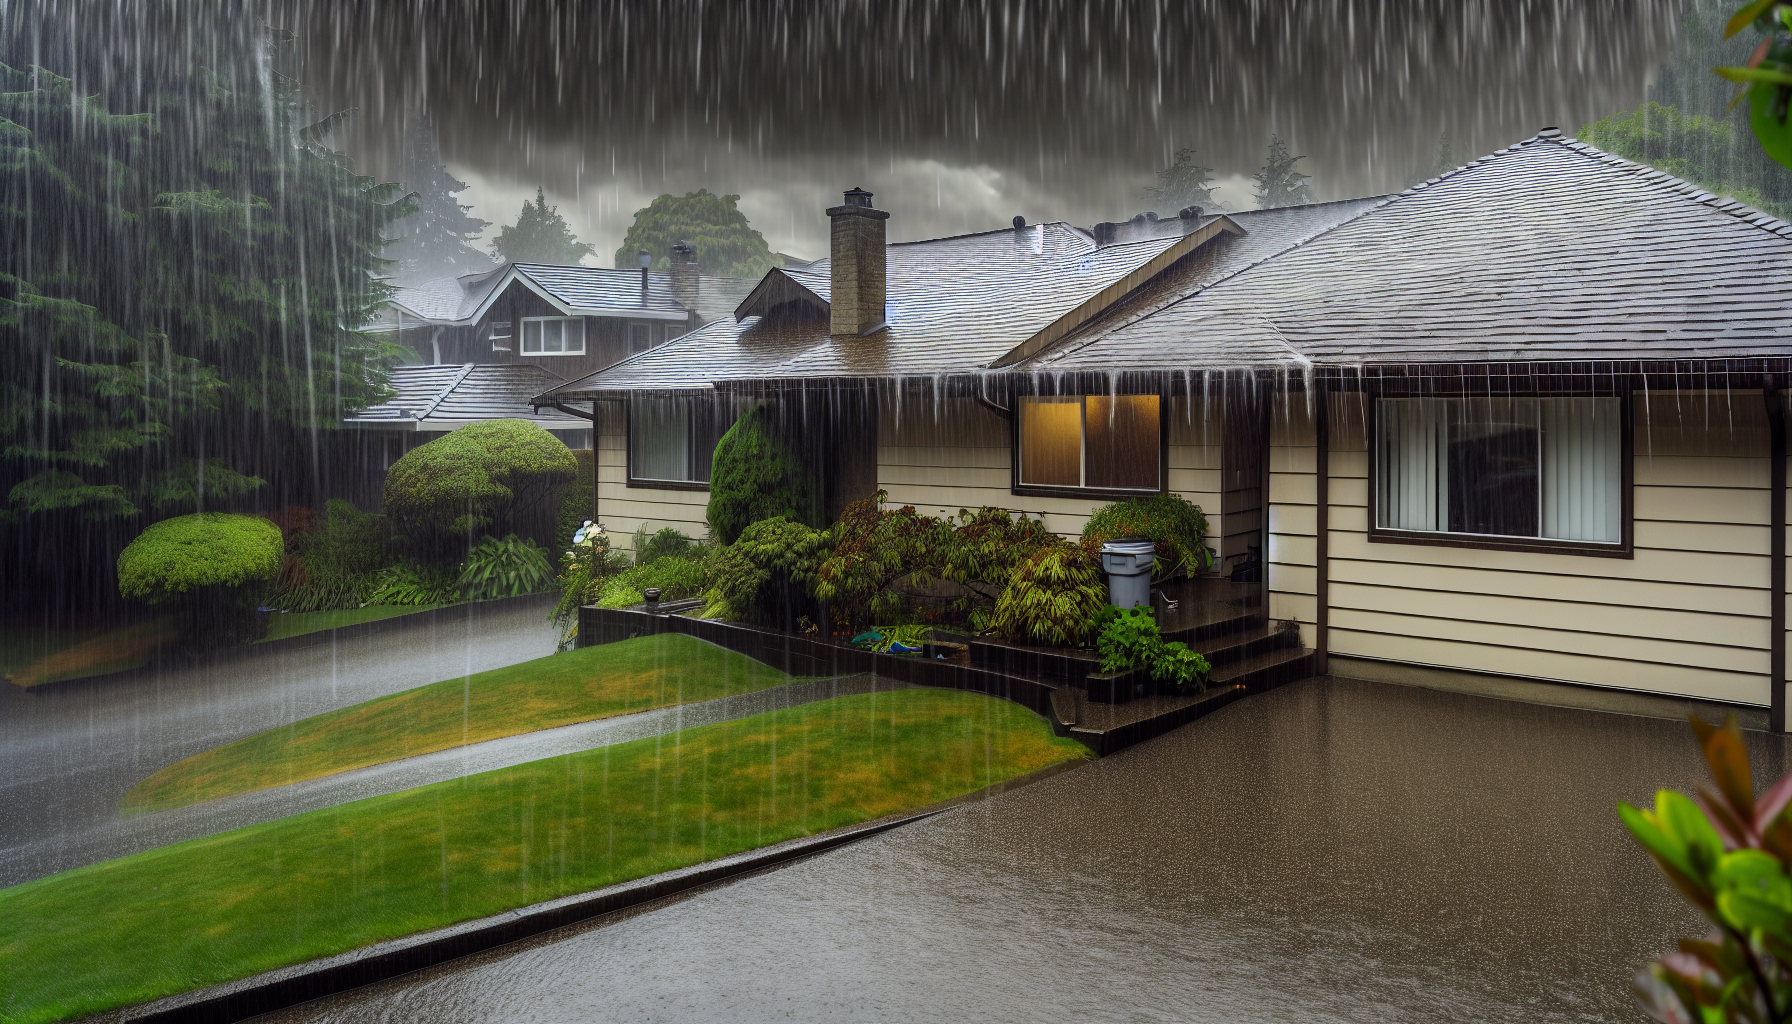 A residential property with overflowing gutters during heavy rain